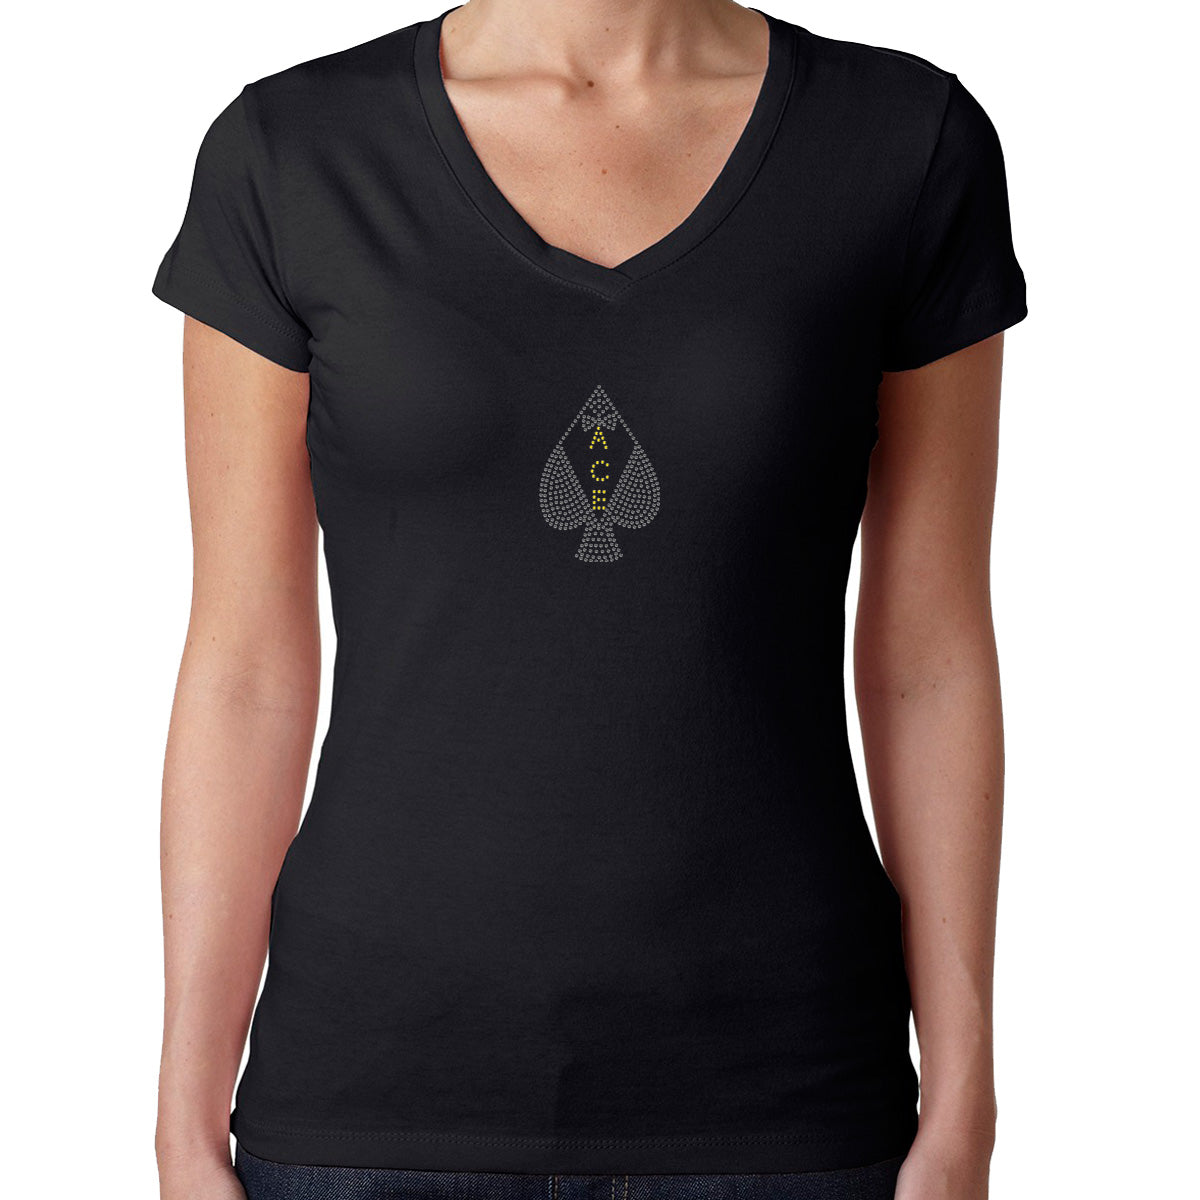 Womens T-Shirt Rhinestone Bling Black Fitted Tee Poker Casino Ace Spades Crystal